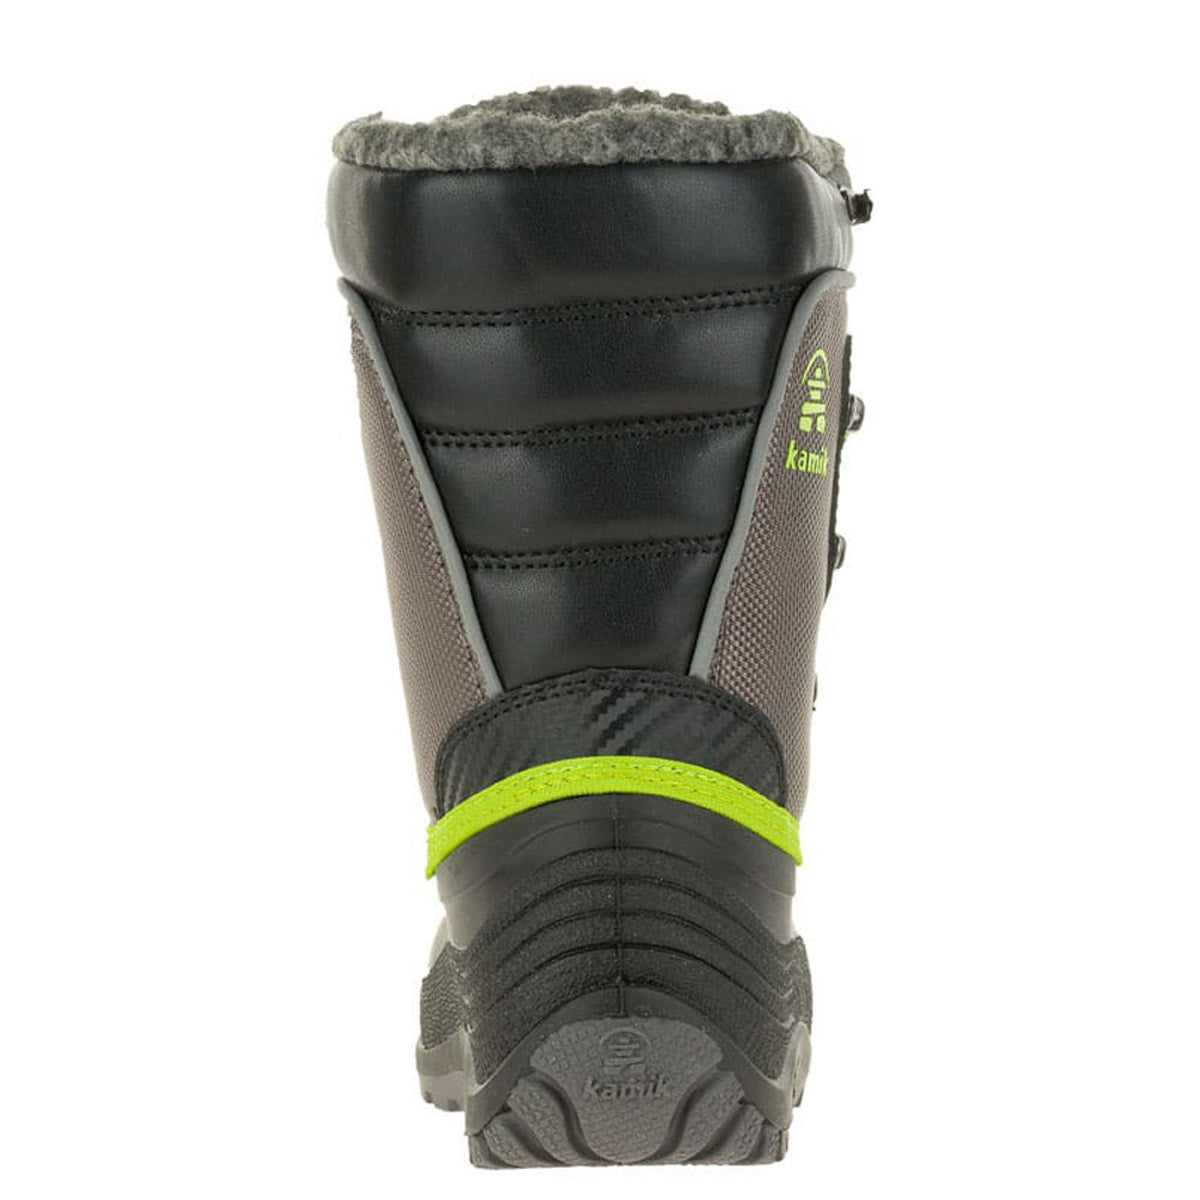 Front view of a Kamik Luke Charcoal/Lime - Kids winter boot with reflective NiteRays patches and fleece lining.